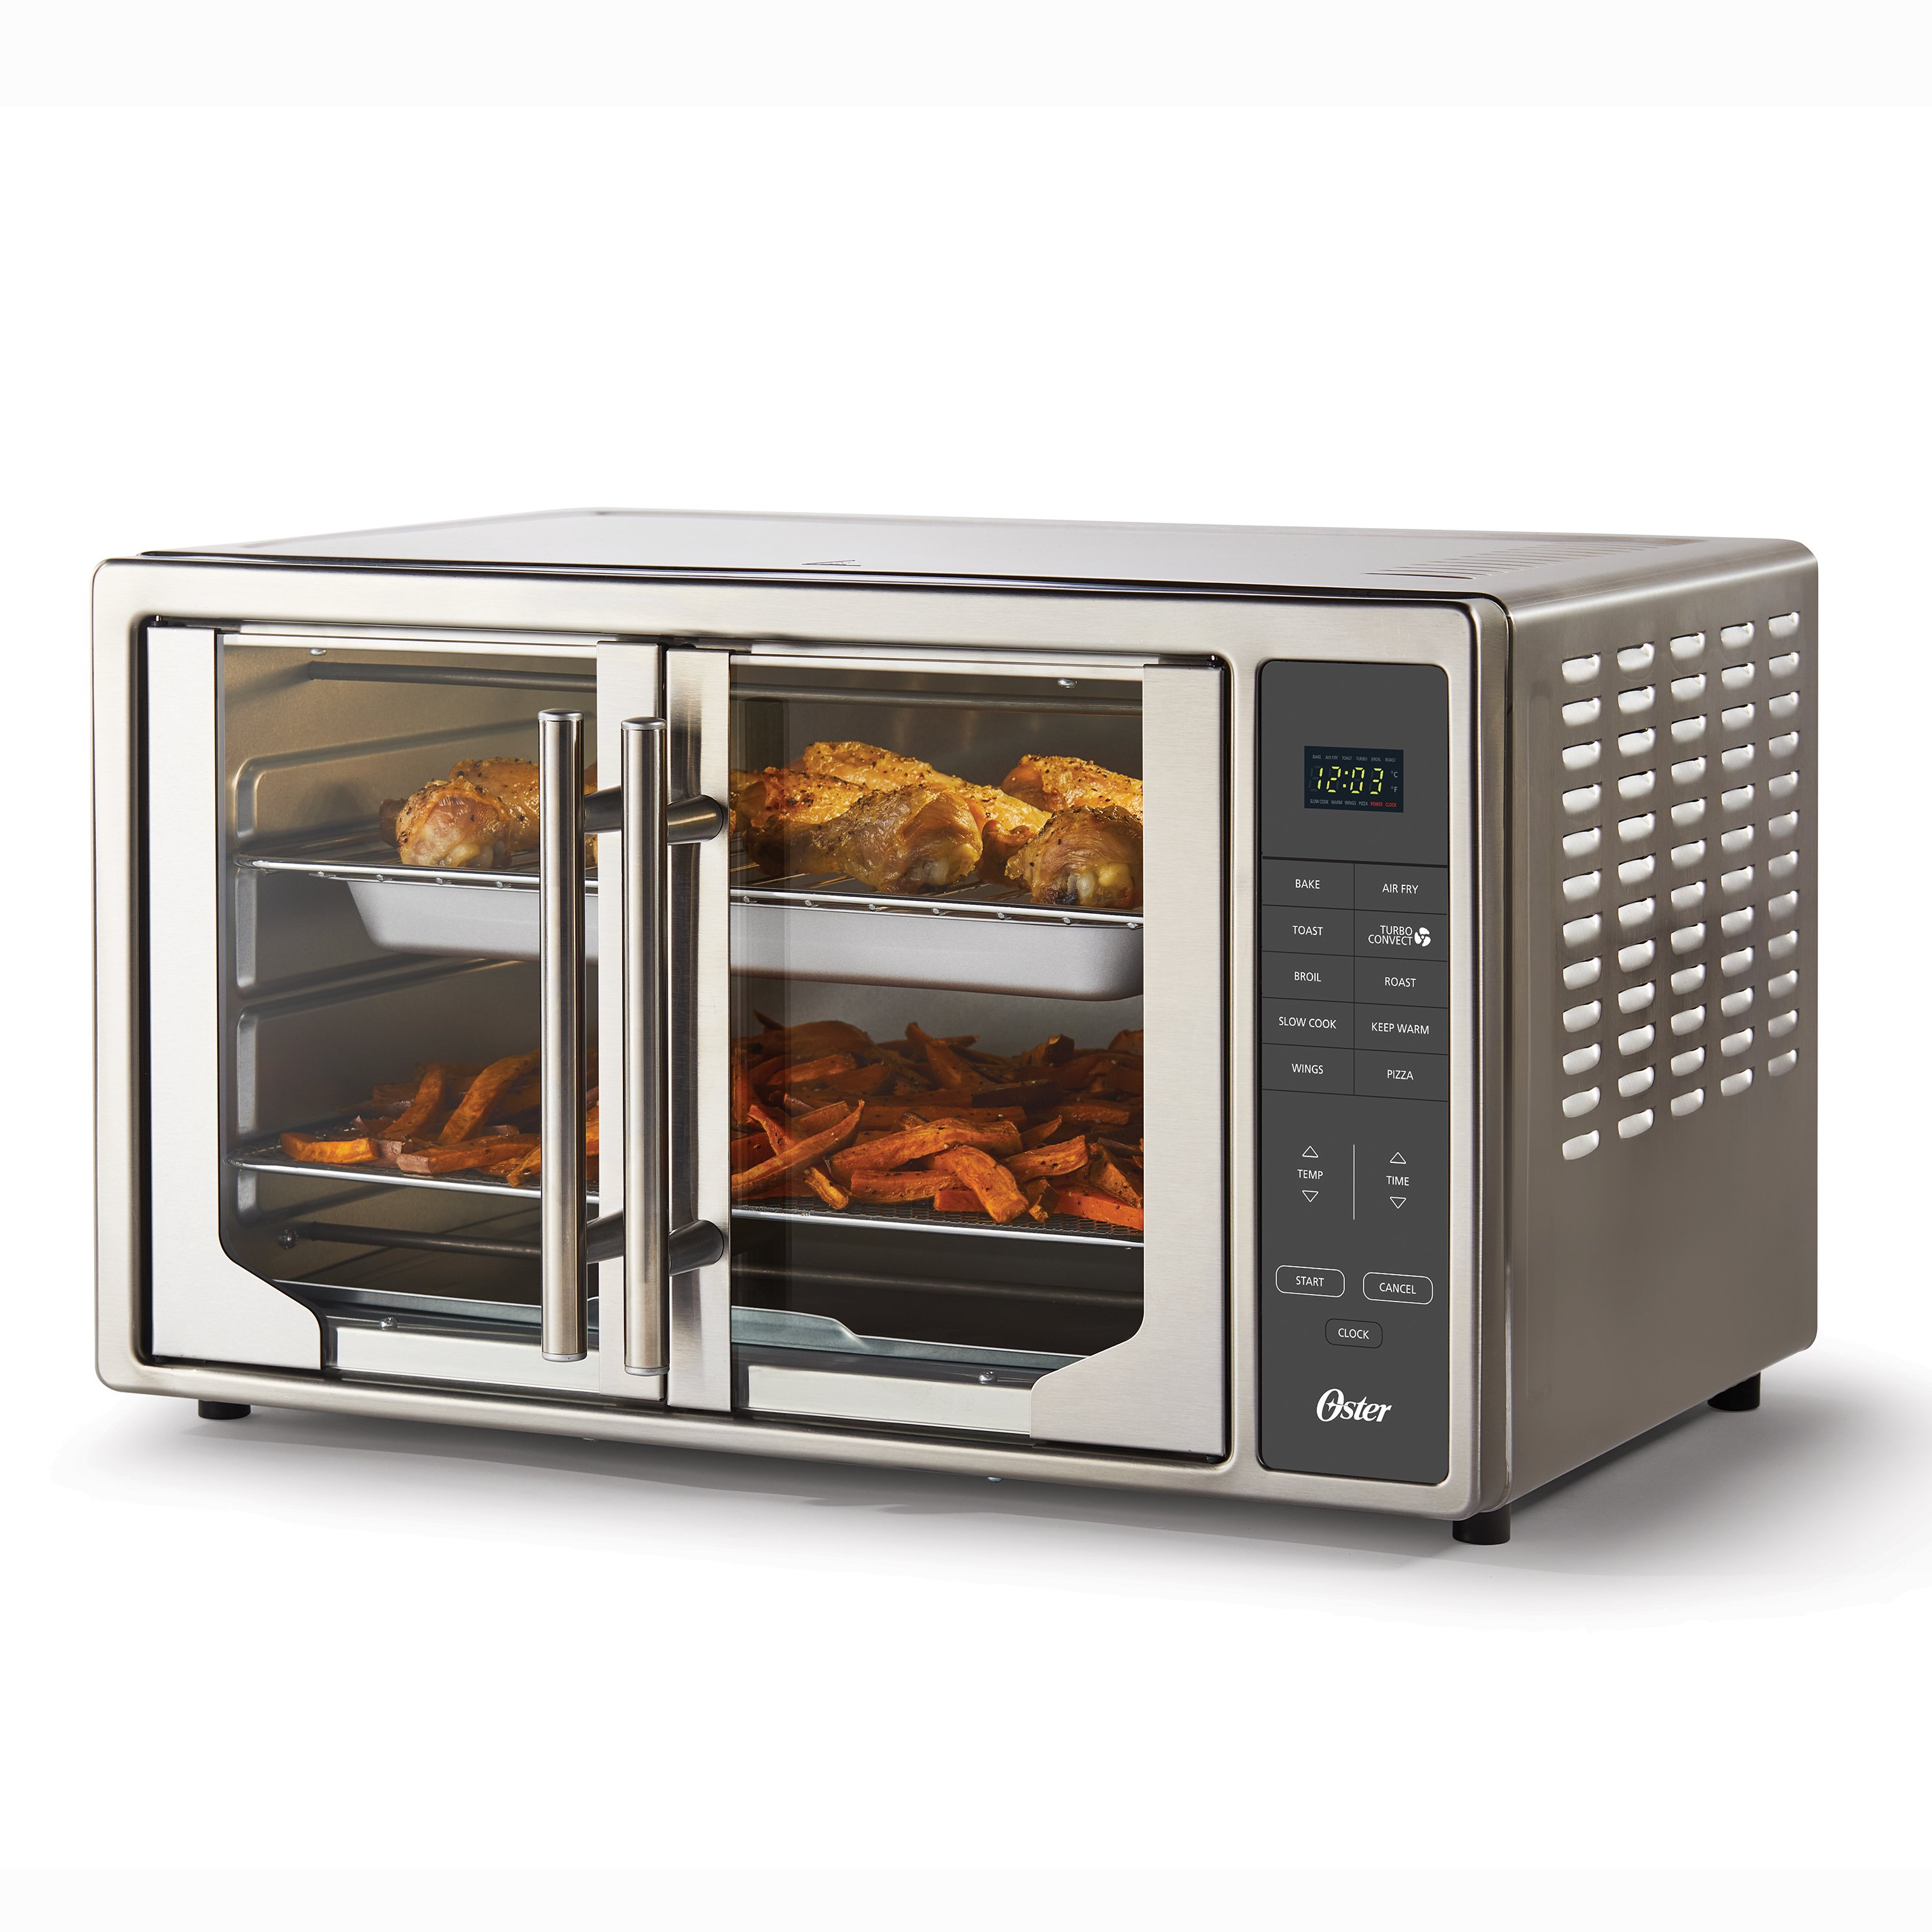 View All Cooking Appliances